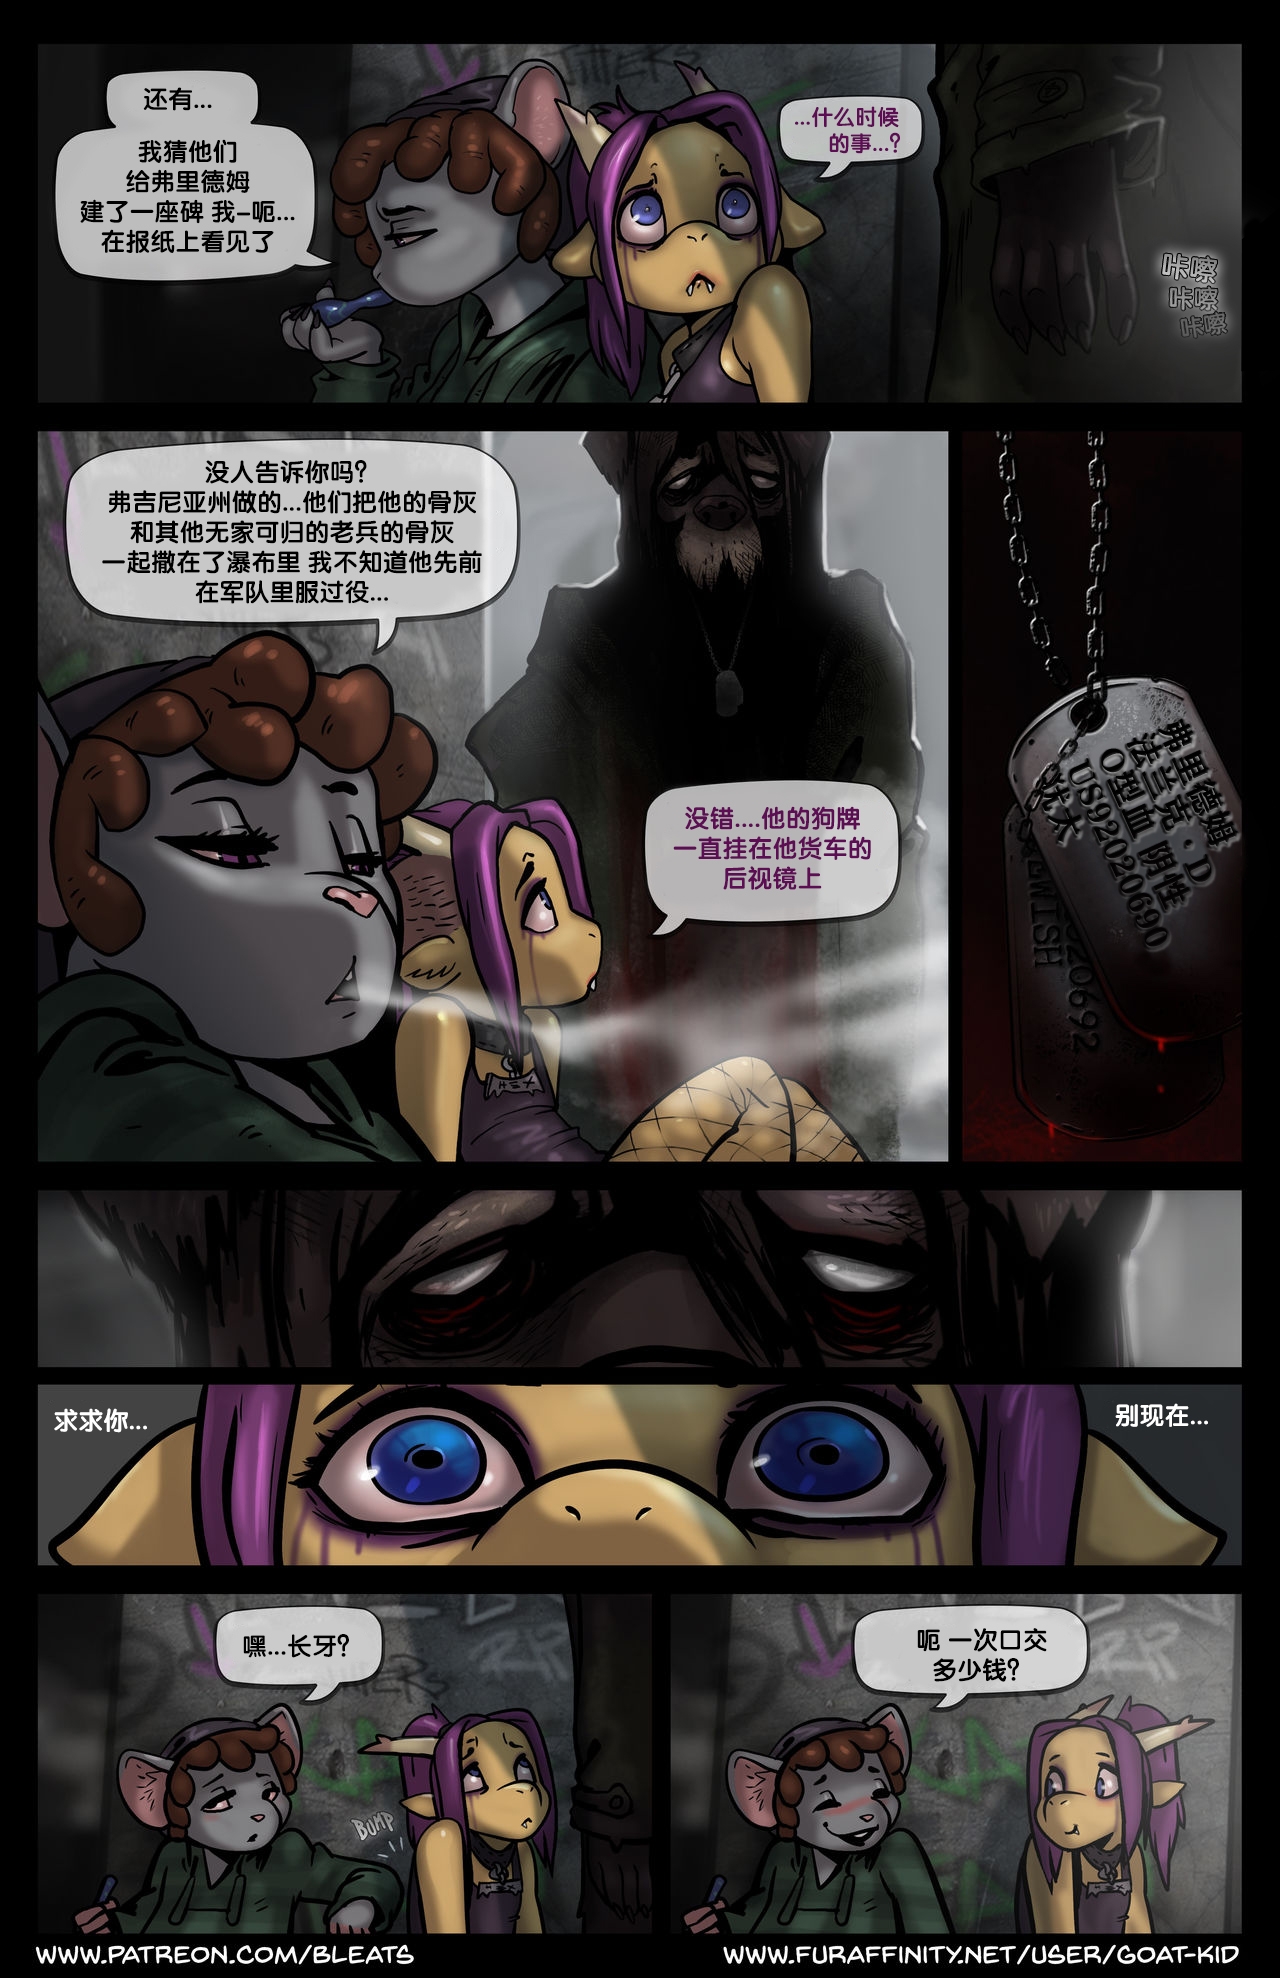 [goat-kid] Scattered issue 2 [Chinese] [逃亡者x新桥月白日语社汉化] 7